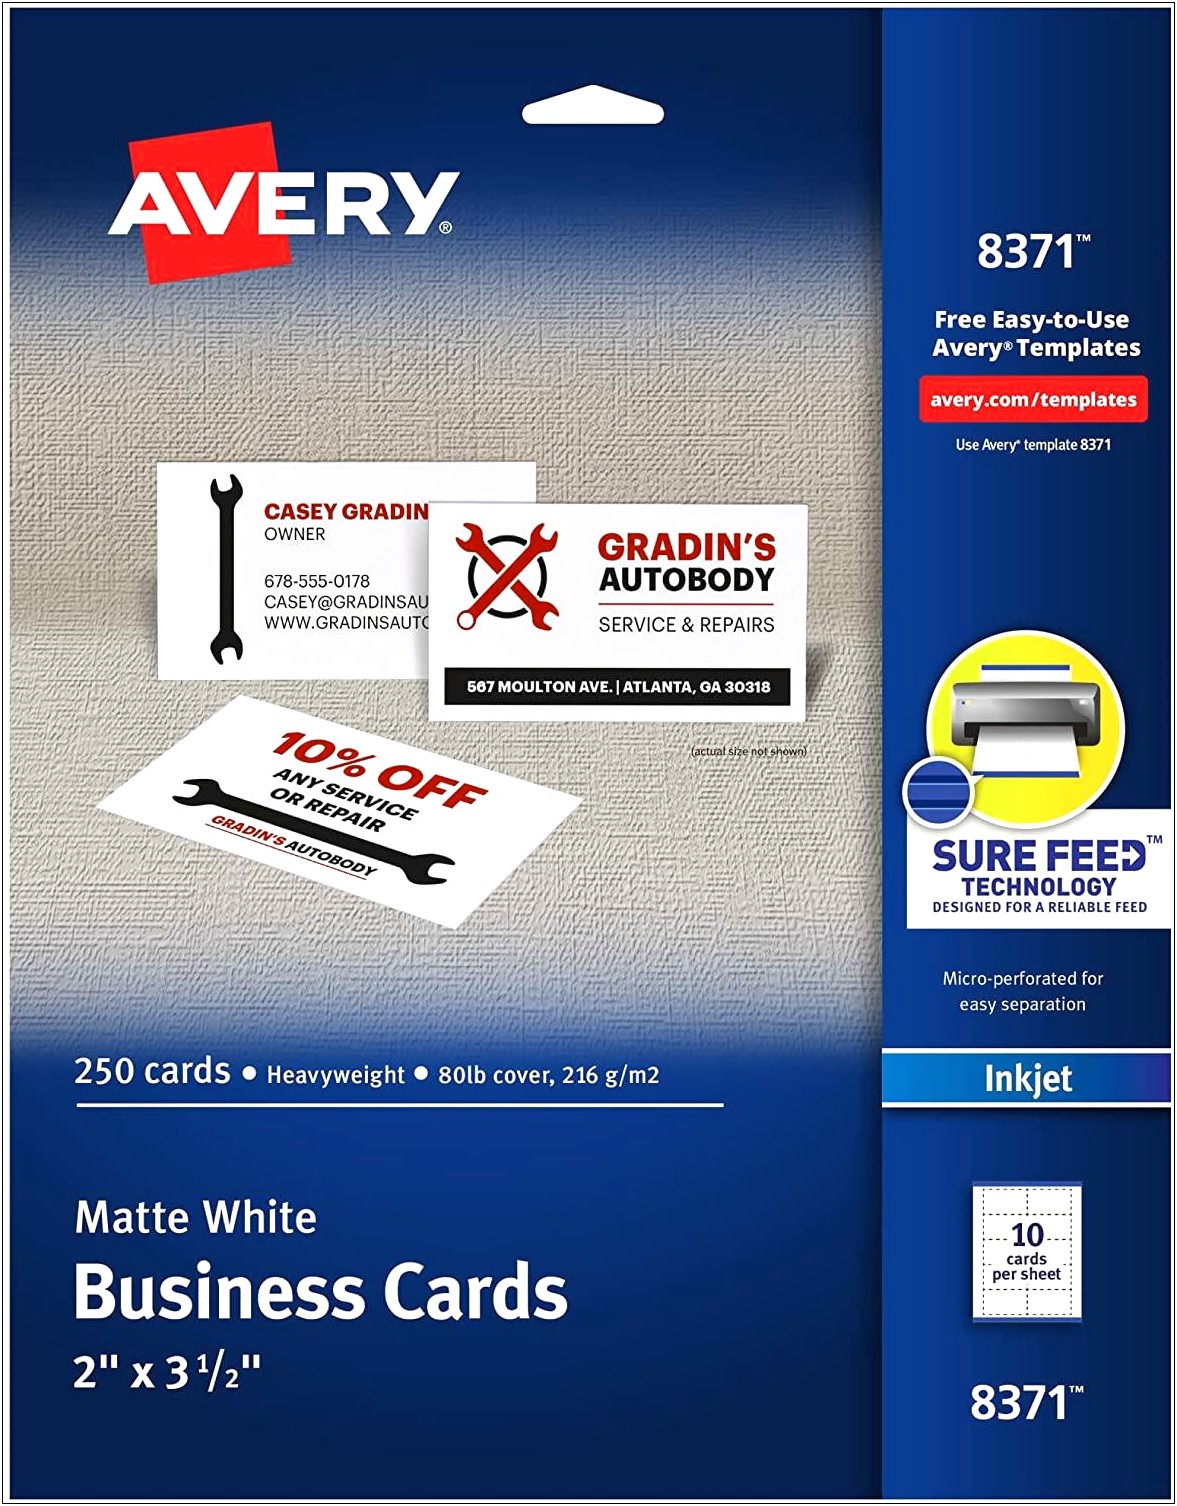 Avery Business Card Template In Word